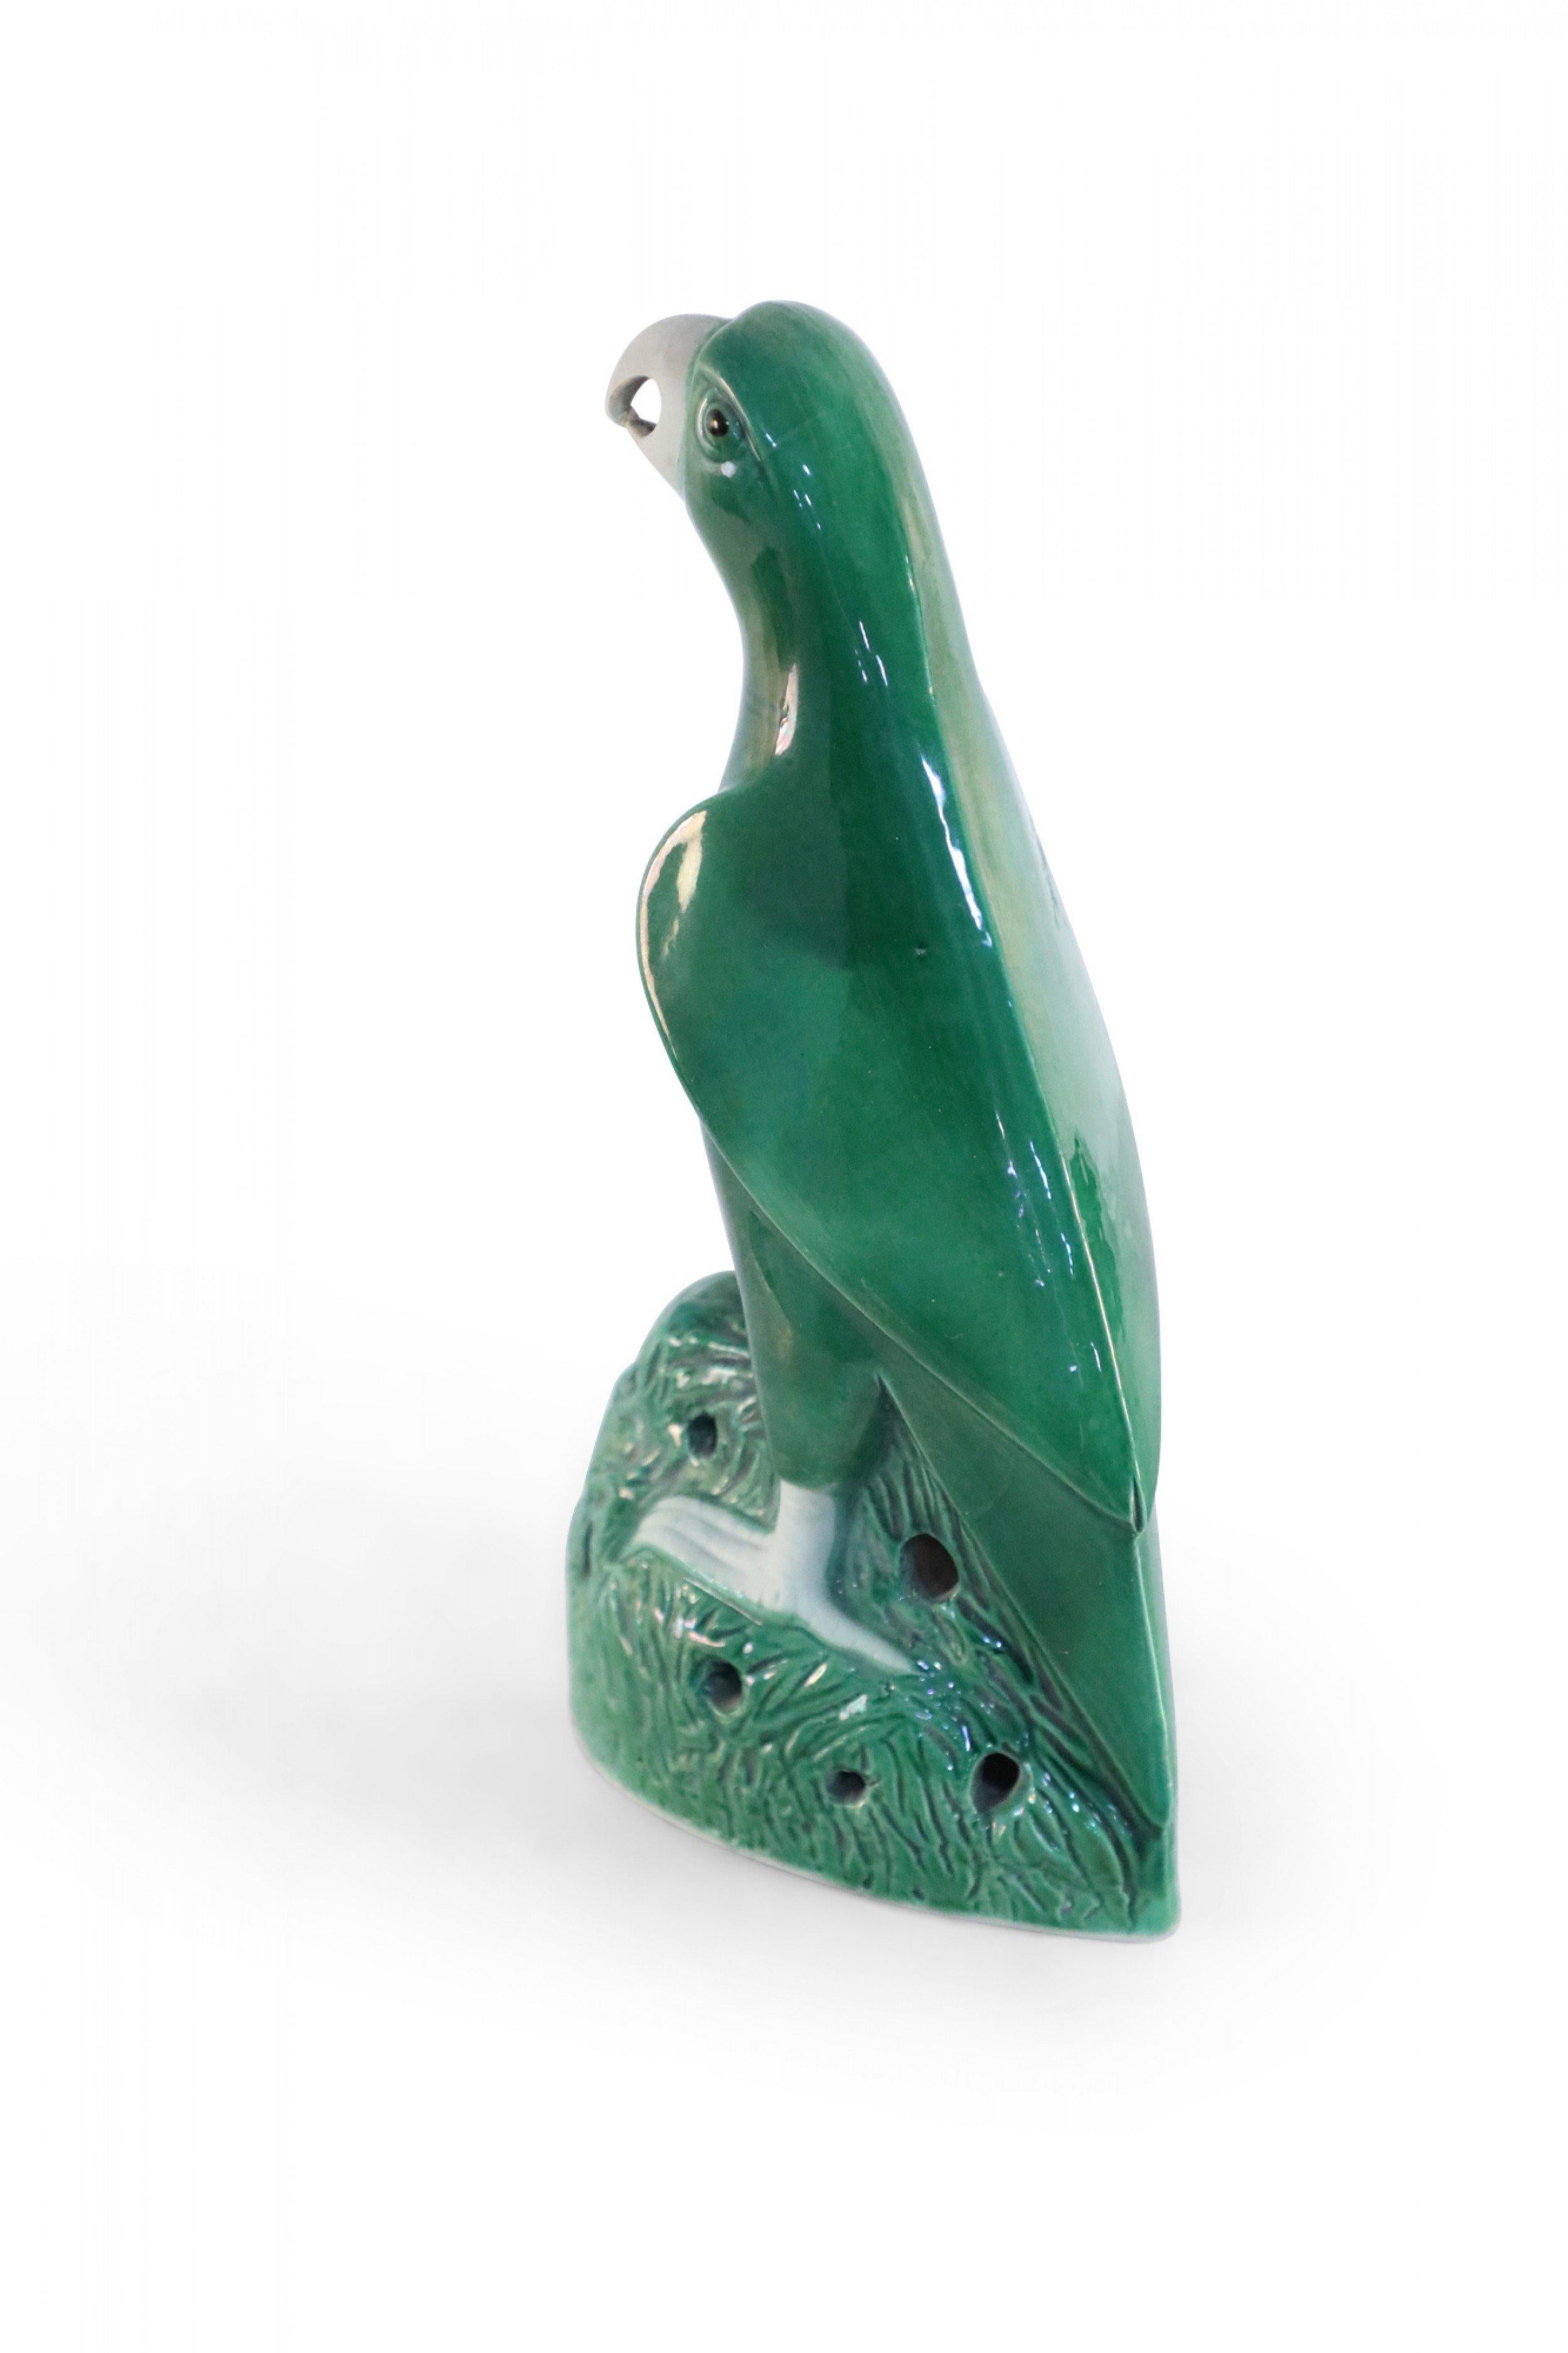 Chinese Export Chinese Green Glazed Porcelain Parrot Statue For Sale